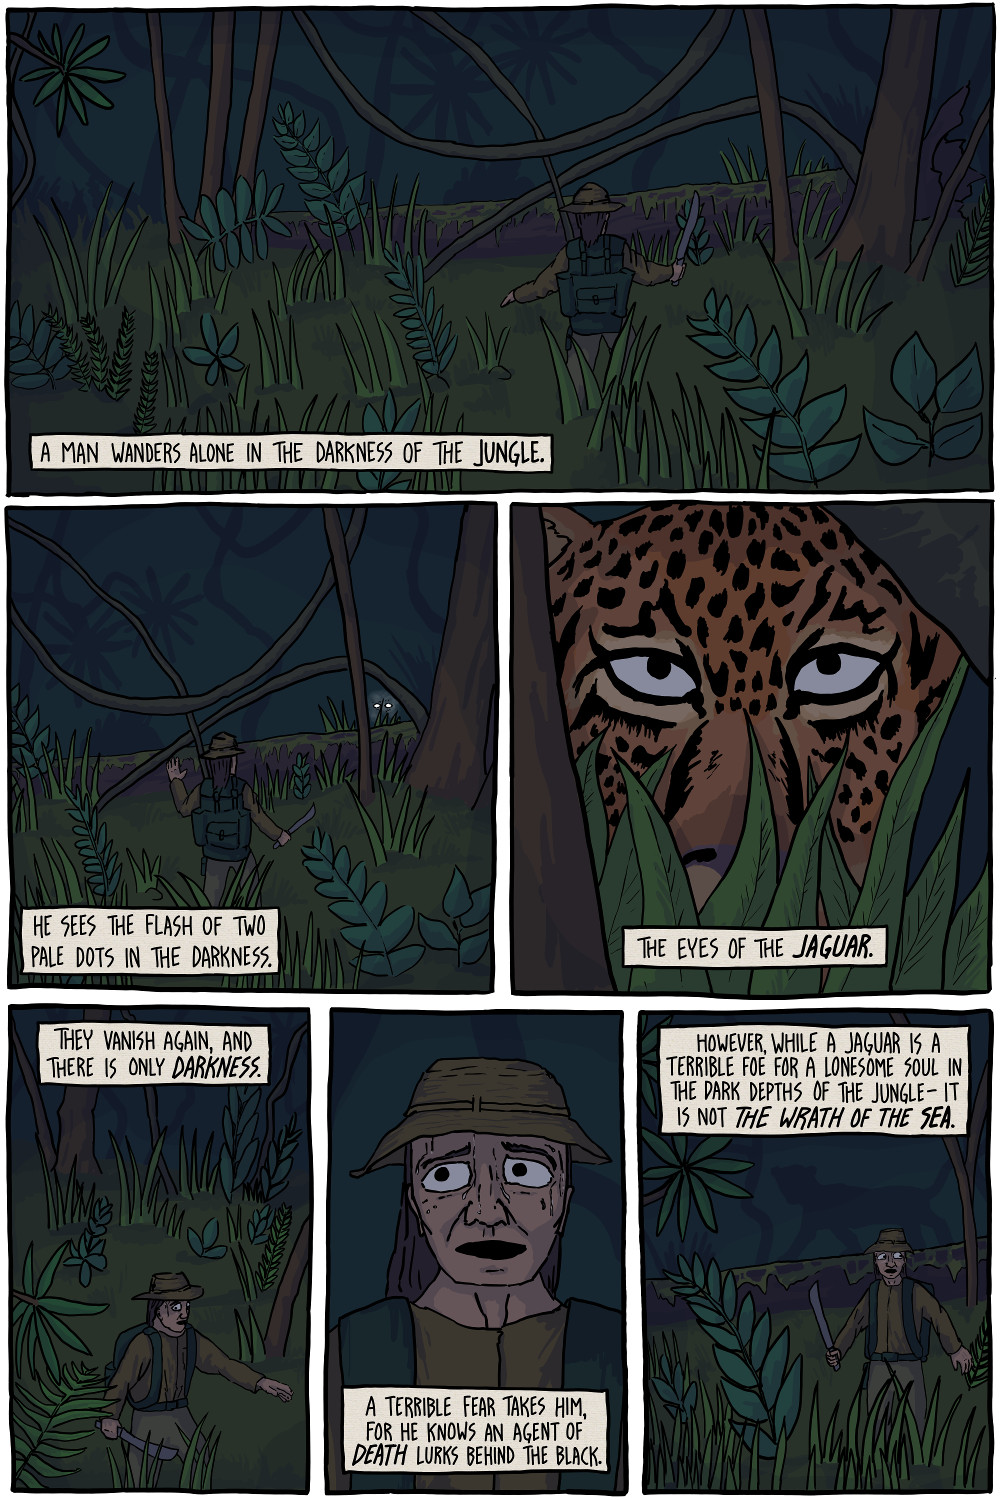 A man wanders alone in the darkness of the jungle.

He sees the flash of two pale dots in the darkness.

A terrible fear takes him, for he knows an agent of death lurks behind the black.

However, while a jaguar is a terrible foe for a lonesome soul in the dark depths of the jungle - it is not the wrath of the sea.
